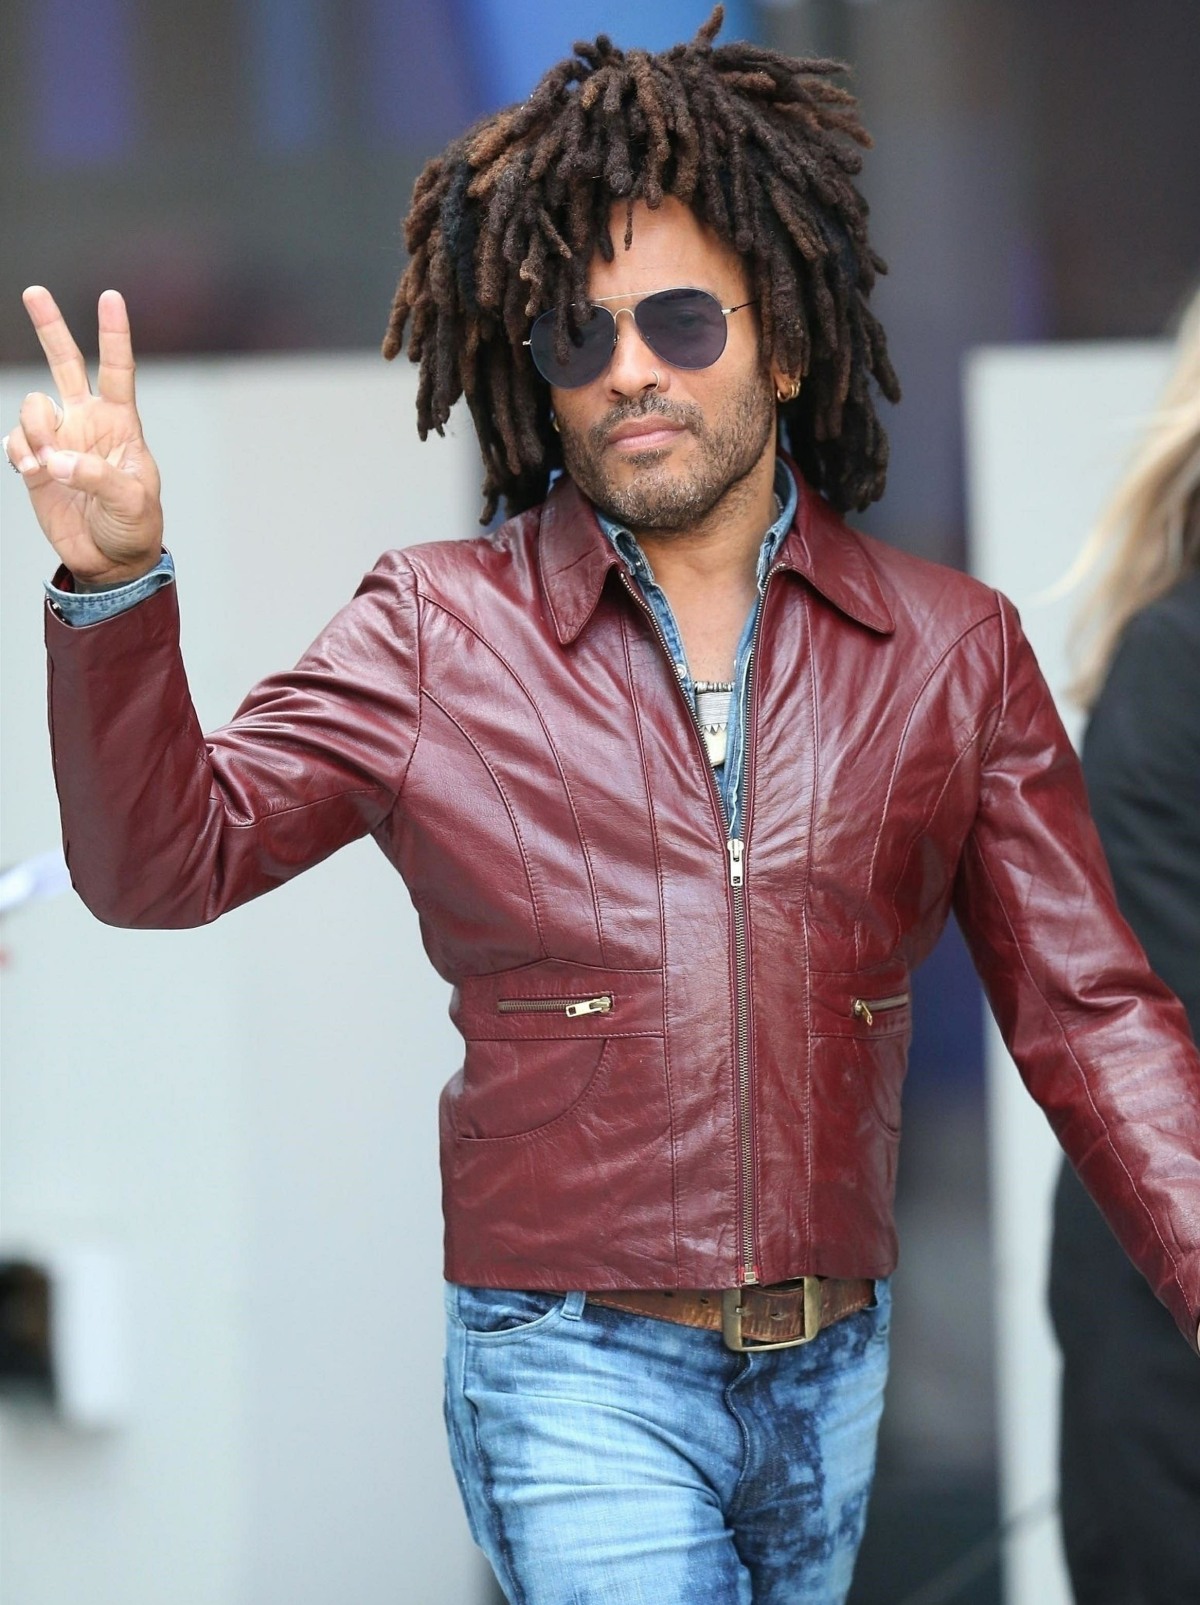 Lenny Kravitz is all about peace at the BBC The One Show